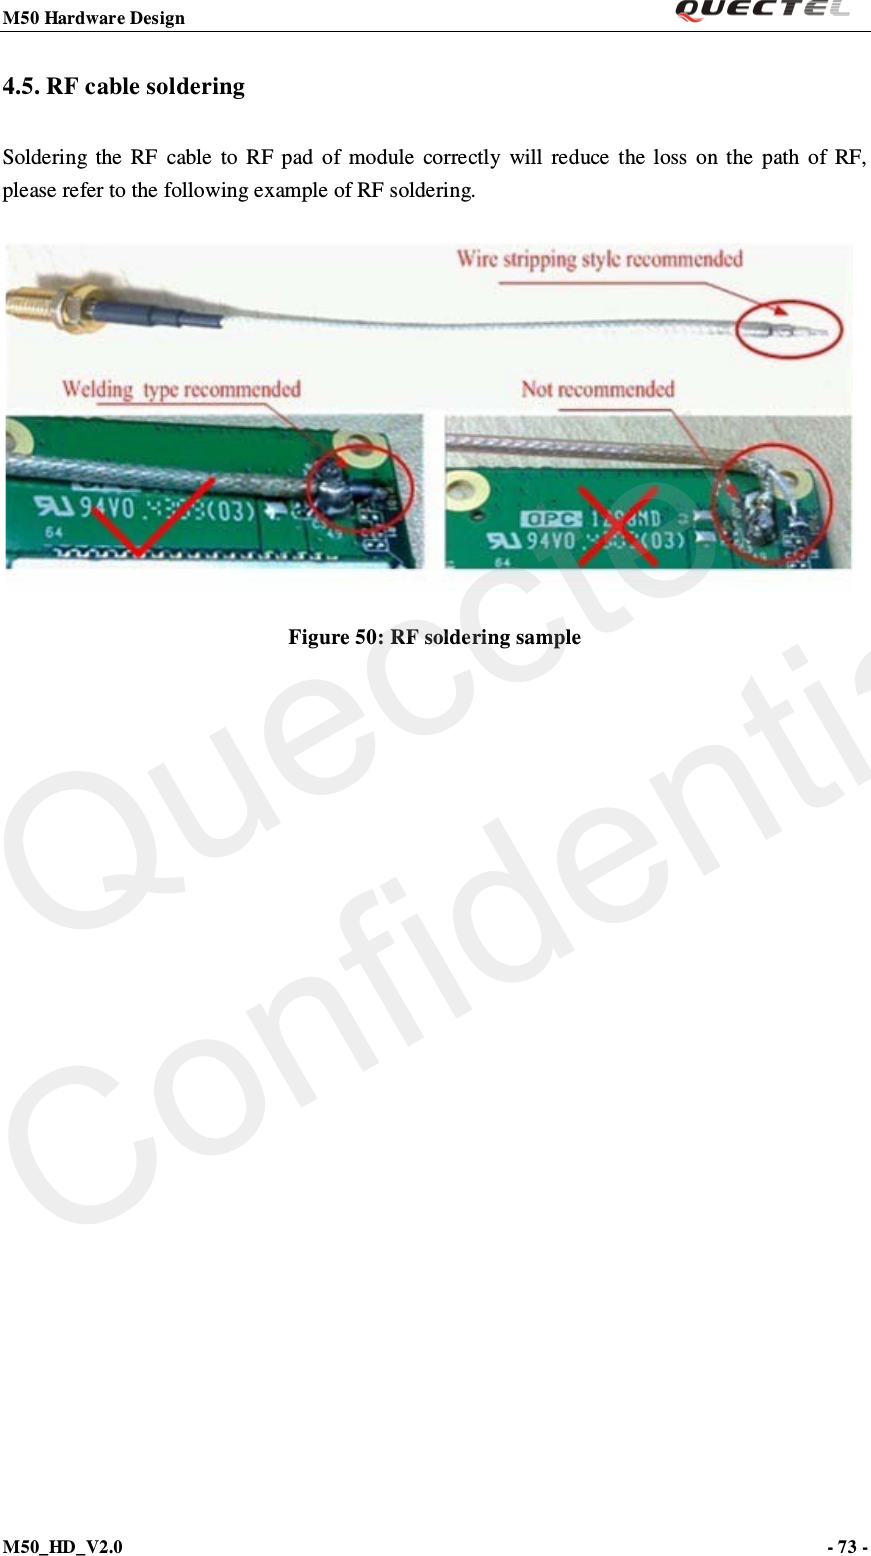 M50 Hardware Design                                                                M50_HD_V2.0                                                                      - 73 -   4.5. RF cable soldering Soldering the RF cable to RF pad of module  correctly  will  reduce the loss on the path of RF, please refer to the following example of RF soldering.   Figure 50: RF soldering sample     Quecctel Confidential